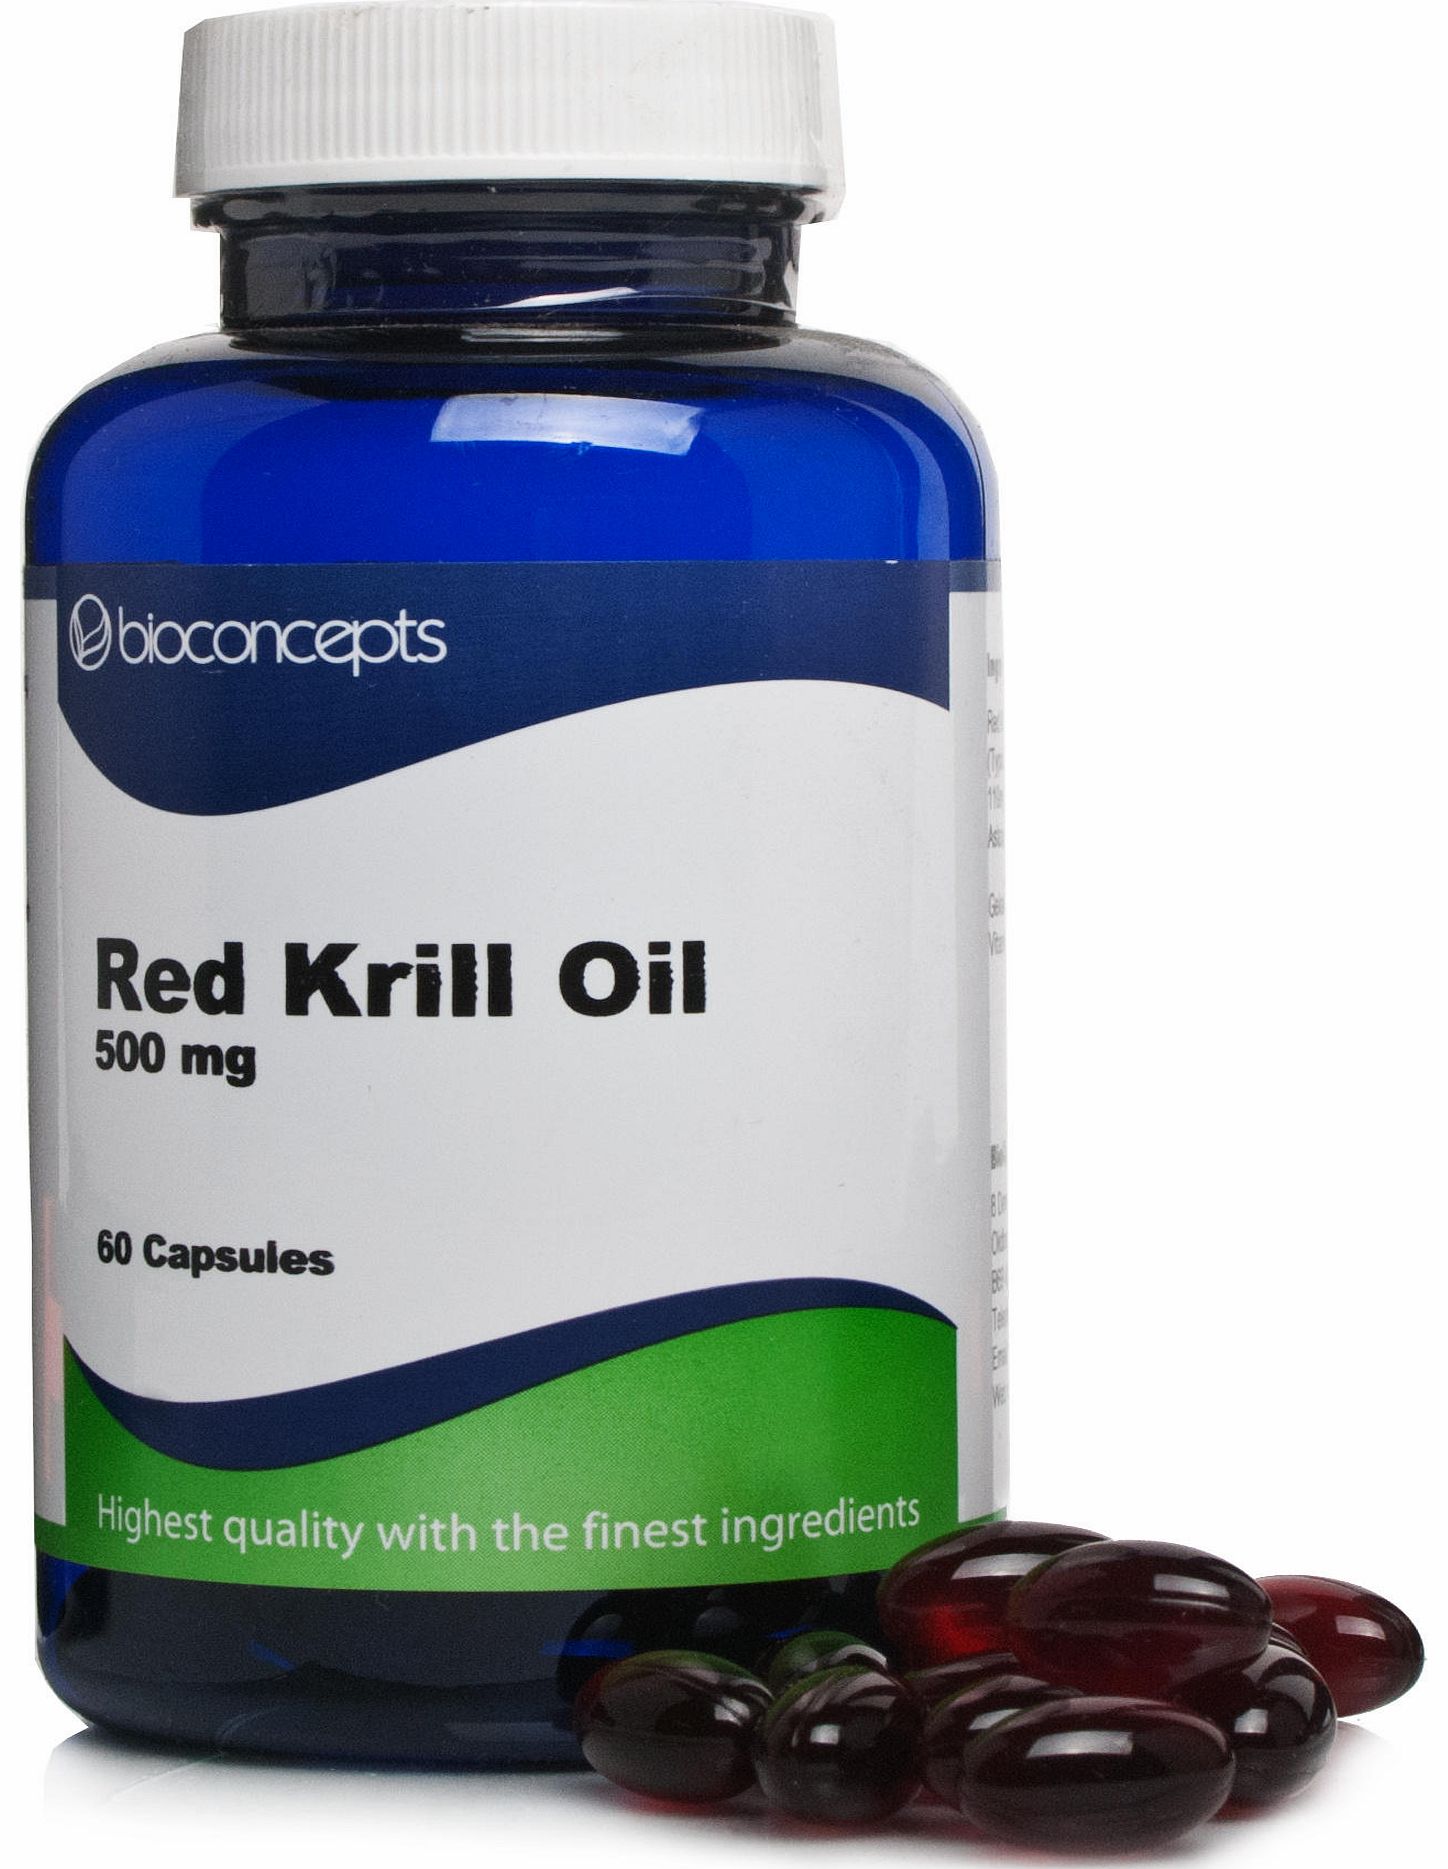 Red Krill Oil 500mg